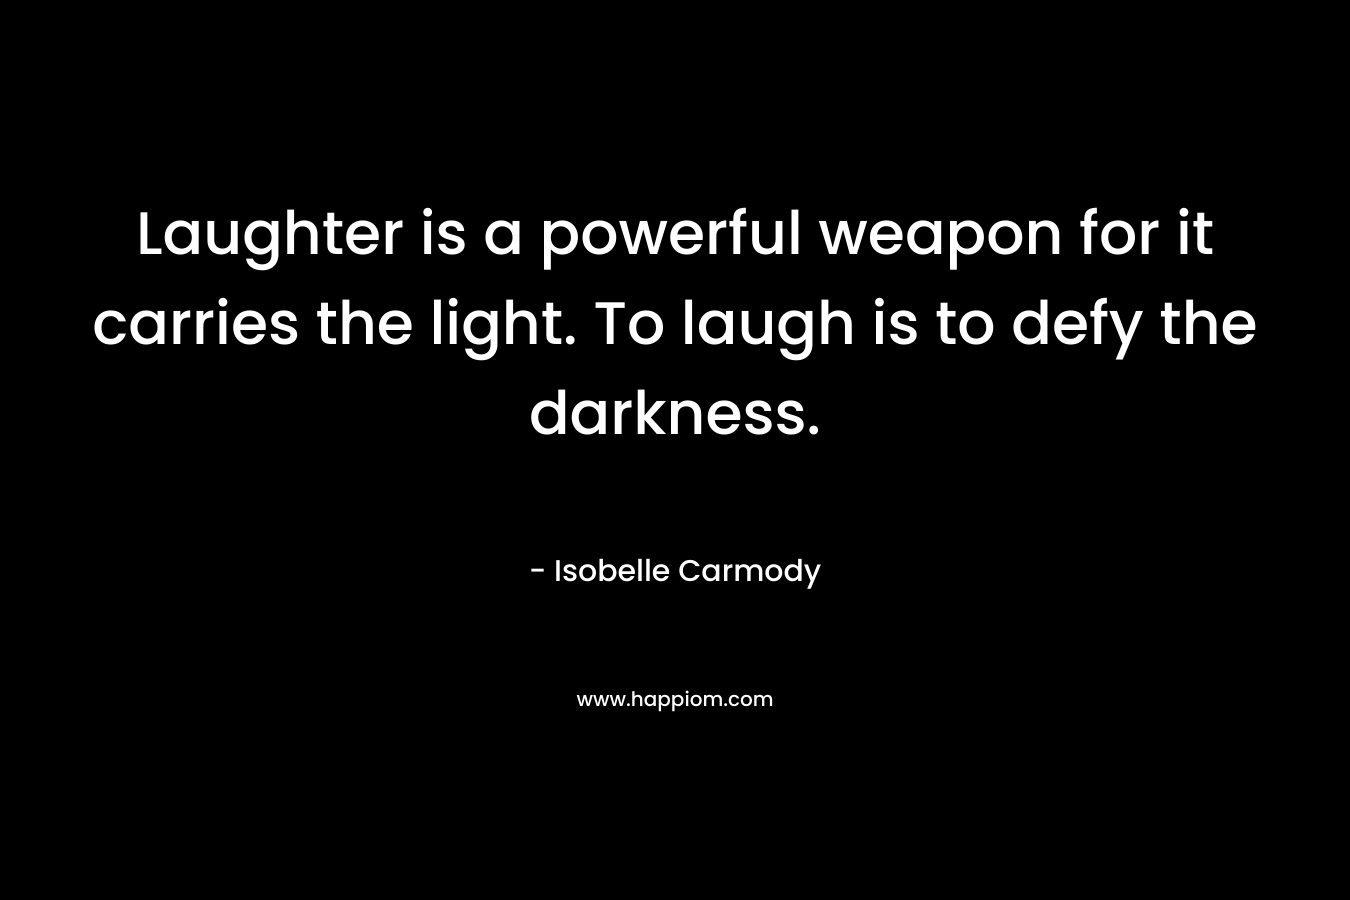 Laughter is a powerful weapon for it carries the light. To laugh is to defy the darkness. – Isobelle Carmody